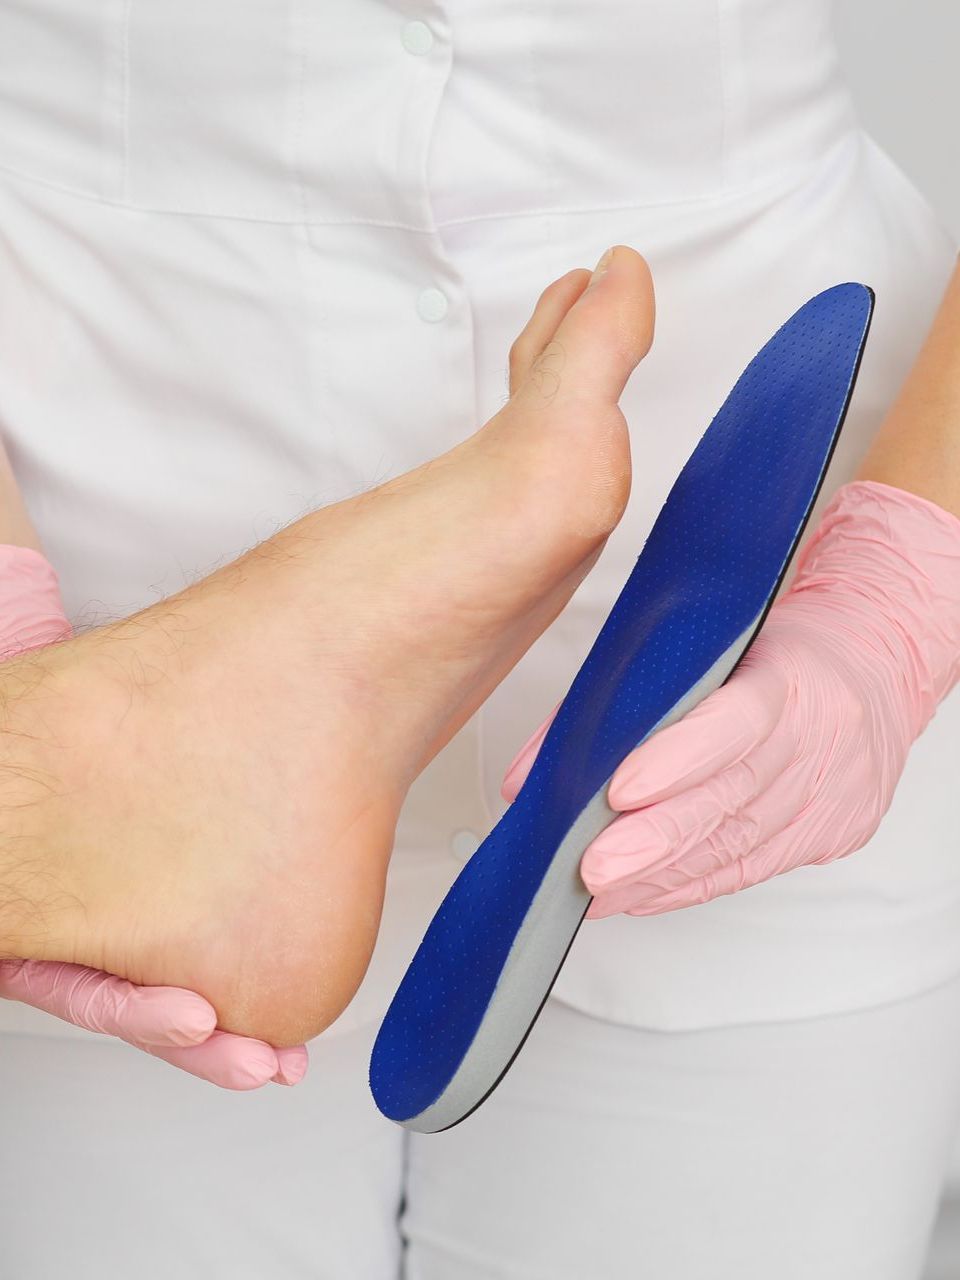 a person 's foot is being examined by a nurse wearing pink gloves